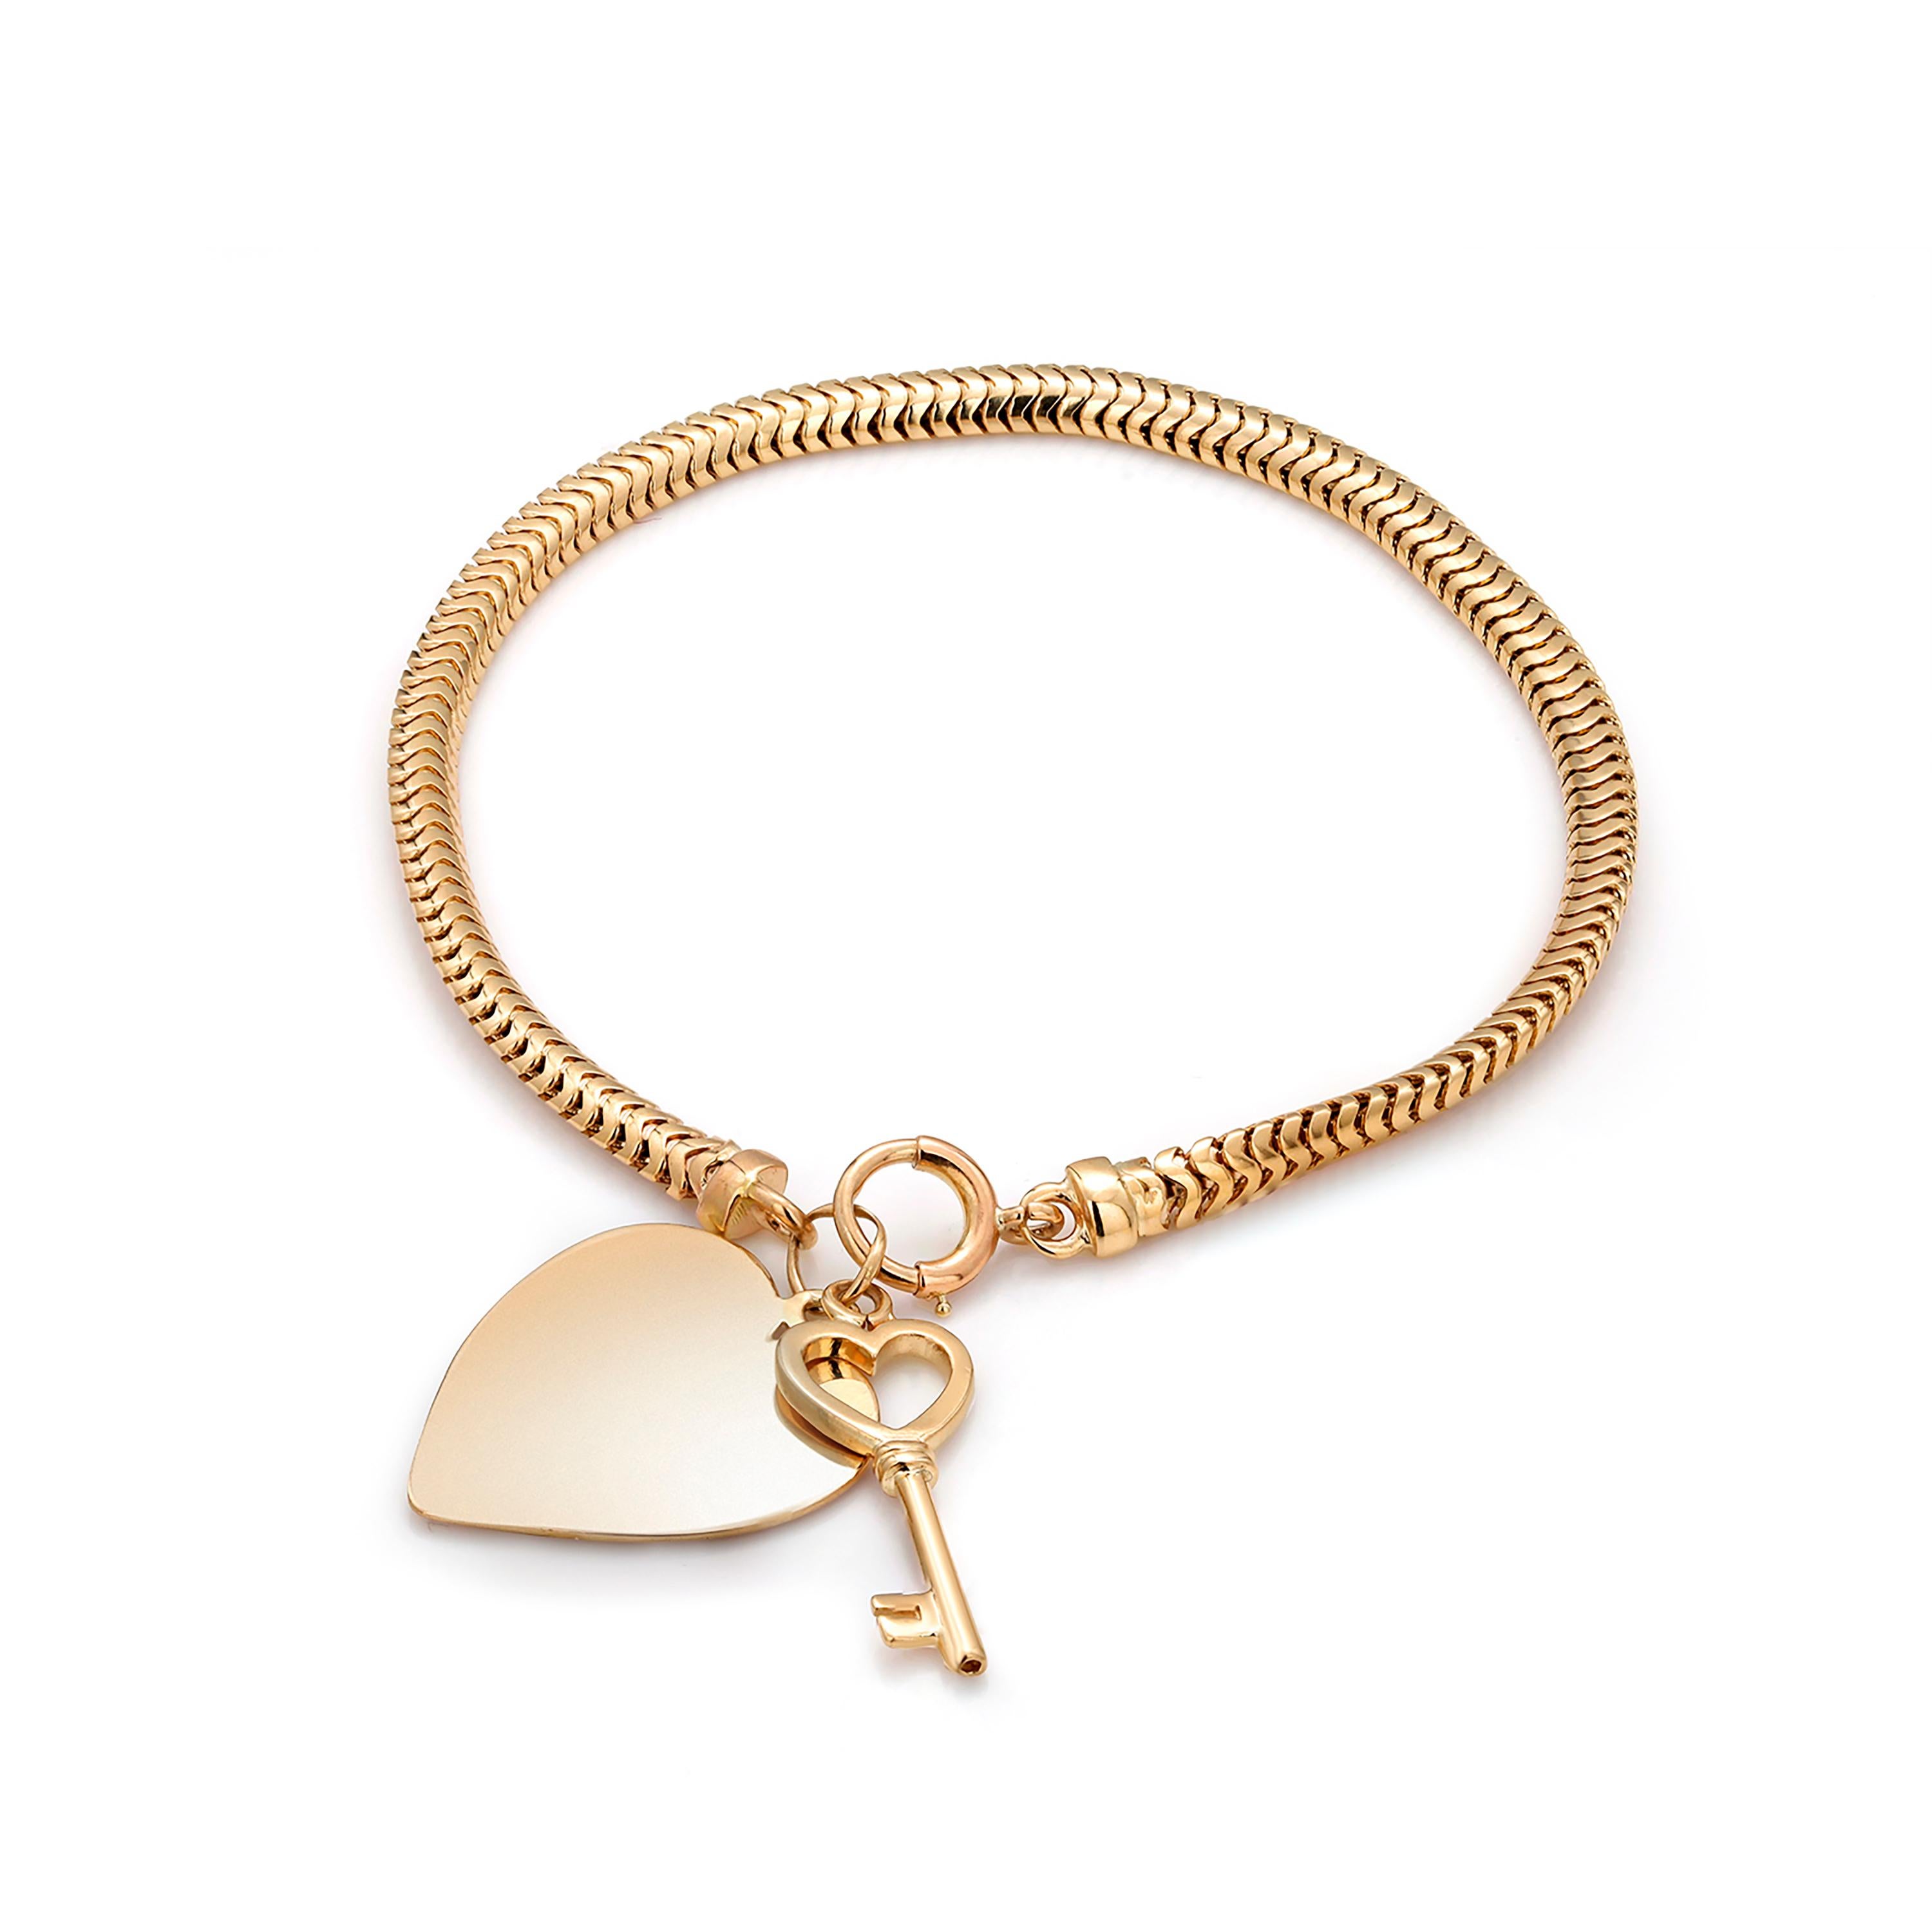 Retro Vintage Yellow Gold Tiffany and Co Heart and Key Charm Bracelet